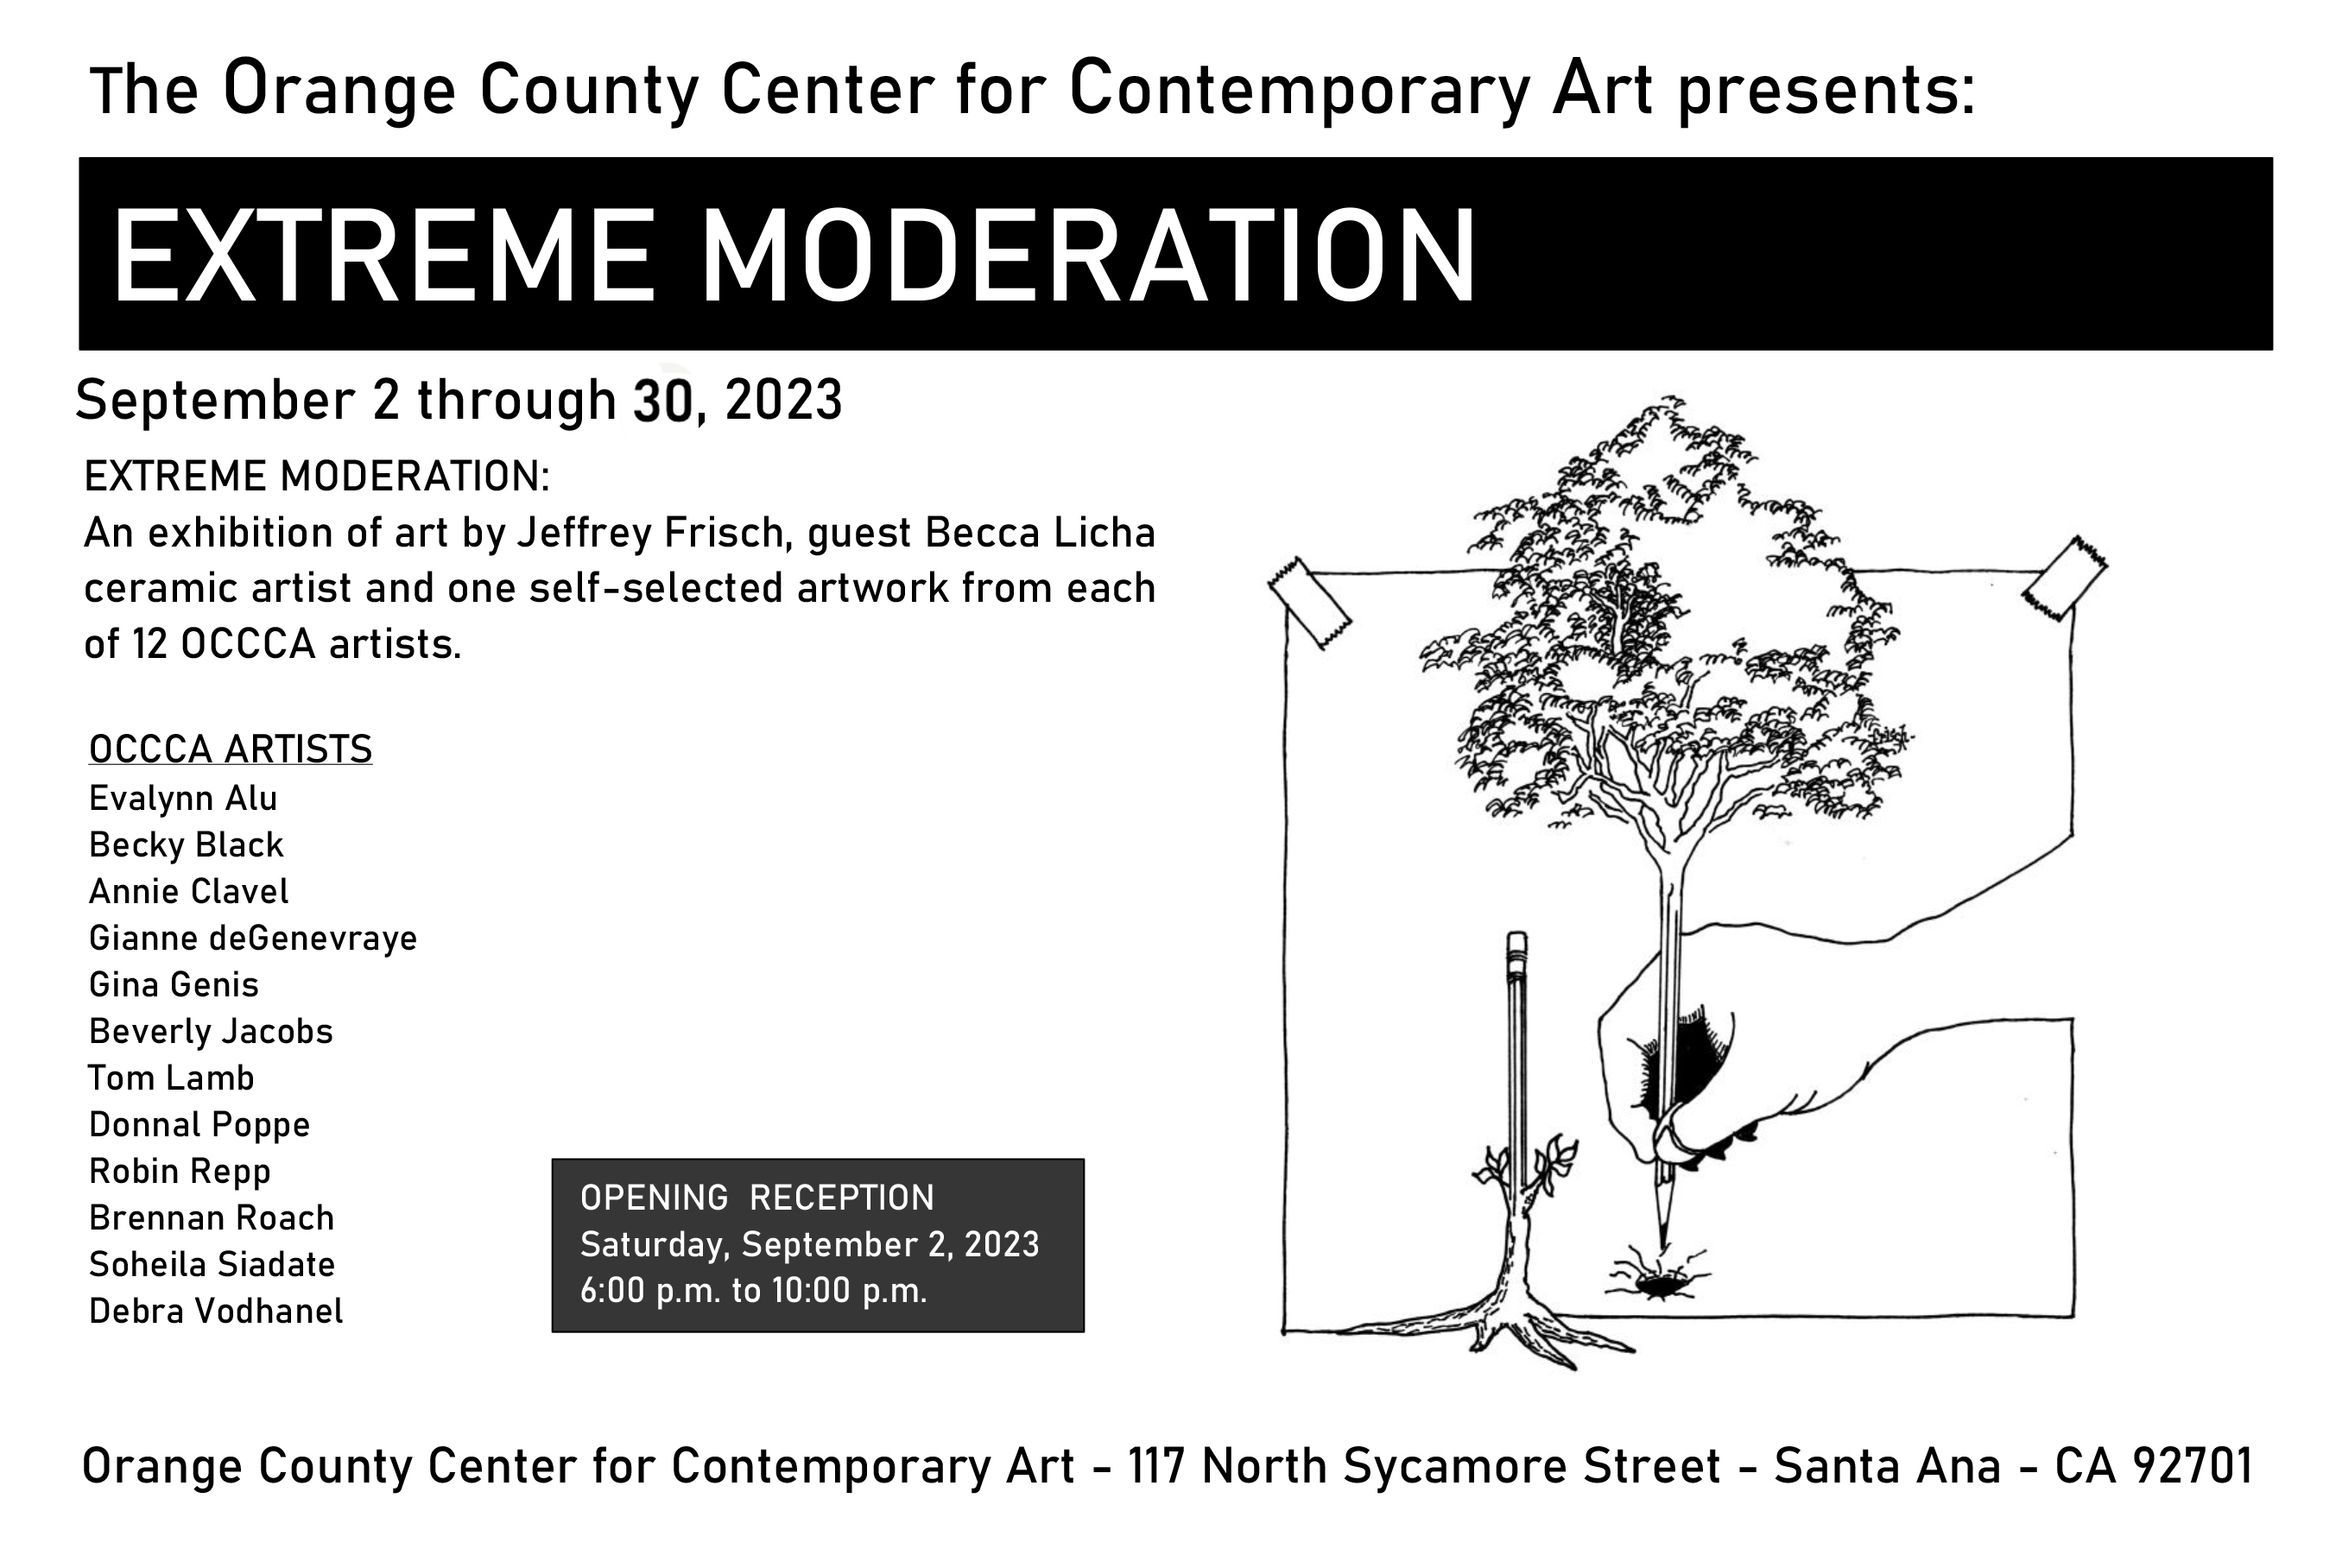 Extreme Moderations exhibition announcement